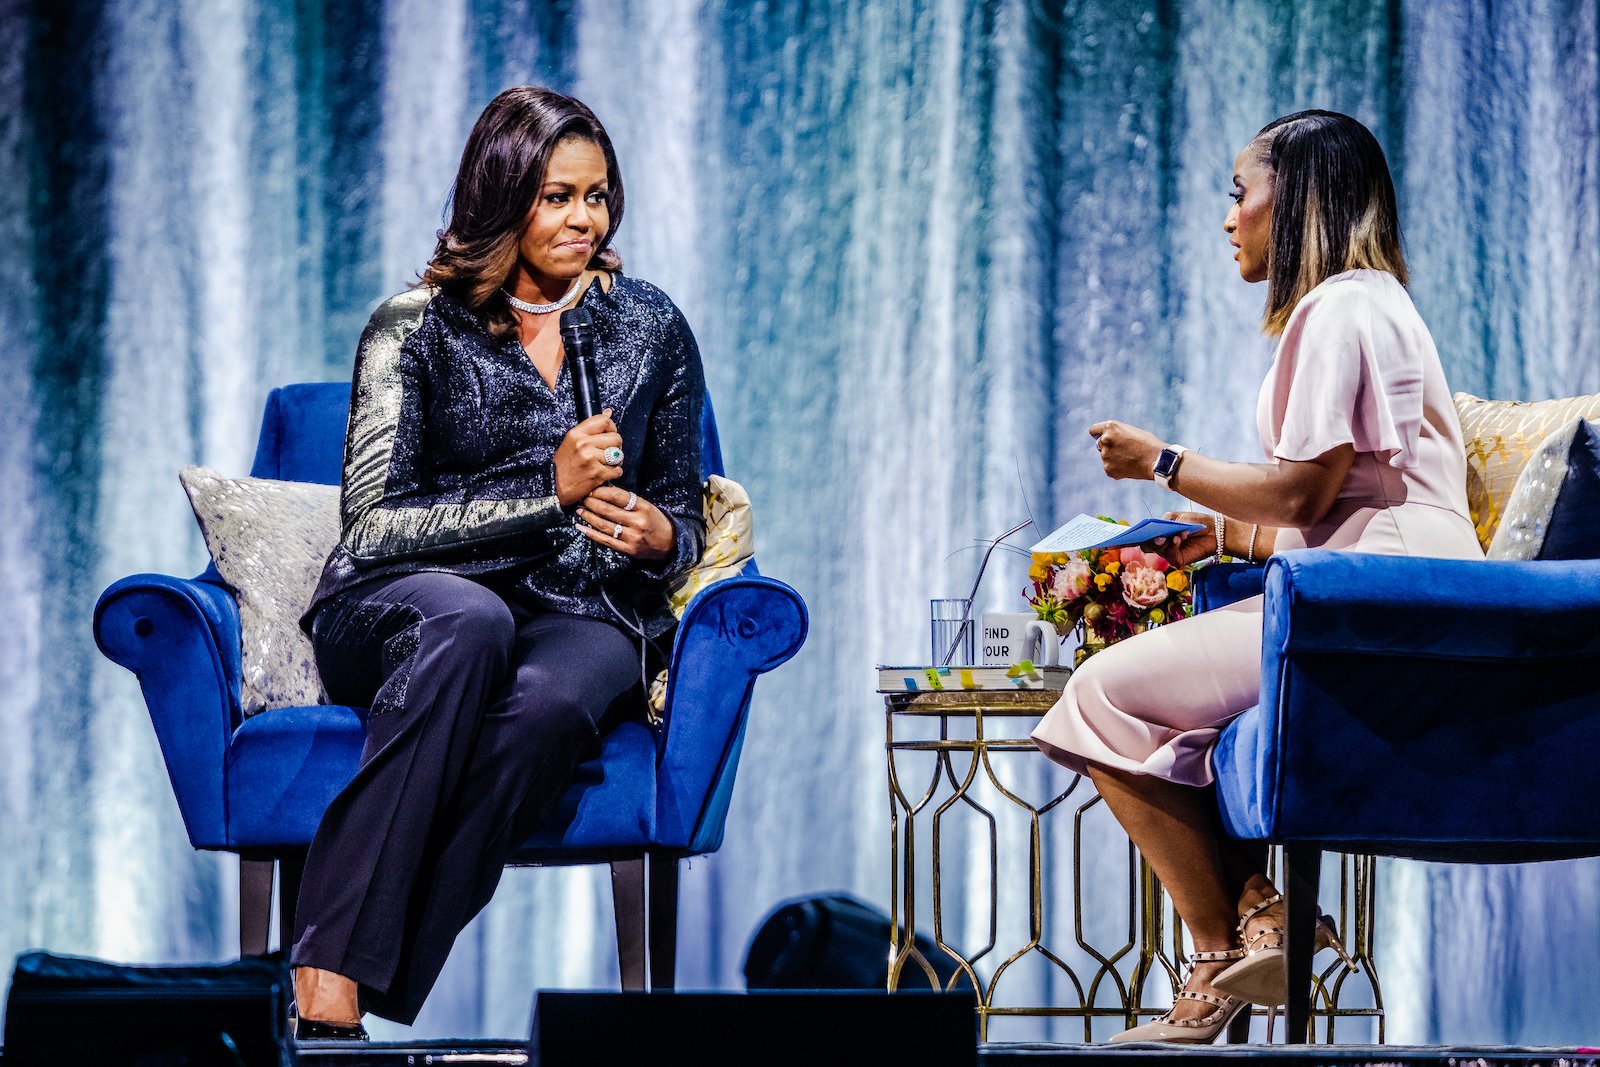 <p>First Lady Michelle Obama started a mentorship program for young women from Washington D.C. area high schools. This initiative, known as the “<a href="https://chicago.suntimes.com/news/2011/3/28/18610610/michelle-obama-books-stars-to-mentor-hilary-swank-geena-davis-anna-deavere-smith-michelle-kwan" rel="noopener">White House Leadership and Mentoring Initiative</a>,” provided young women with valuable opportunities to learn from influential women in various fields, gain insights into different career paths, and receive guidance and support as they navigated their own educational and professional journeys.</p>